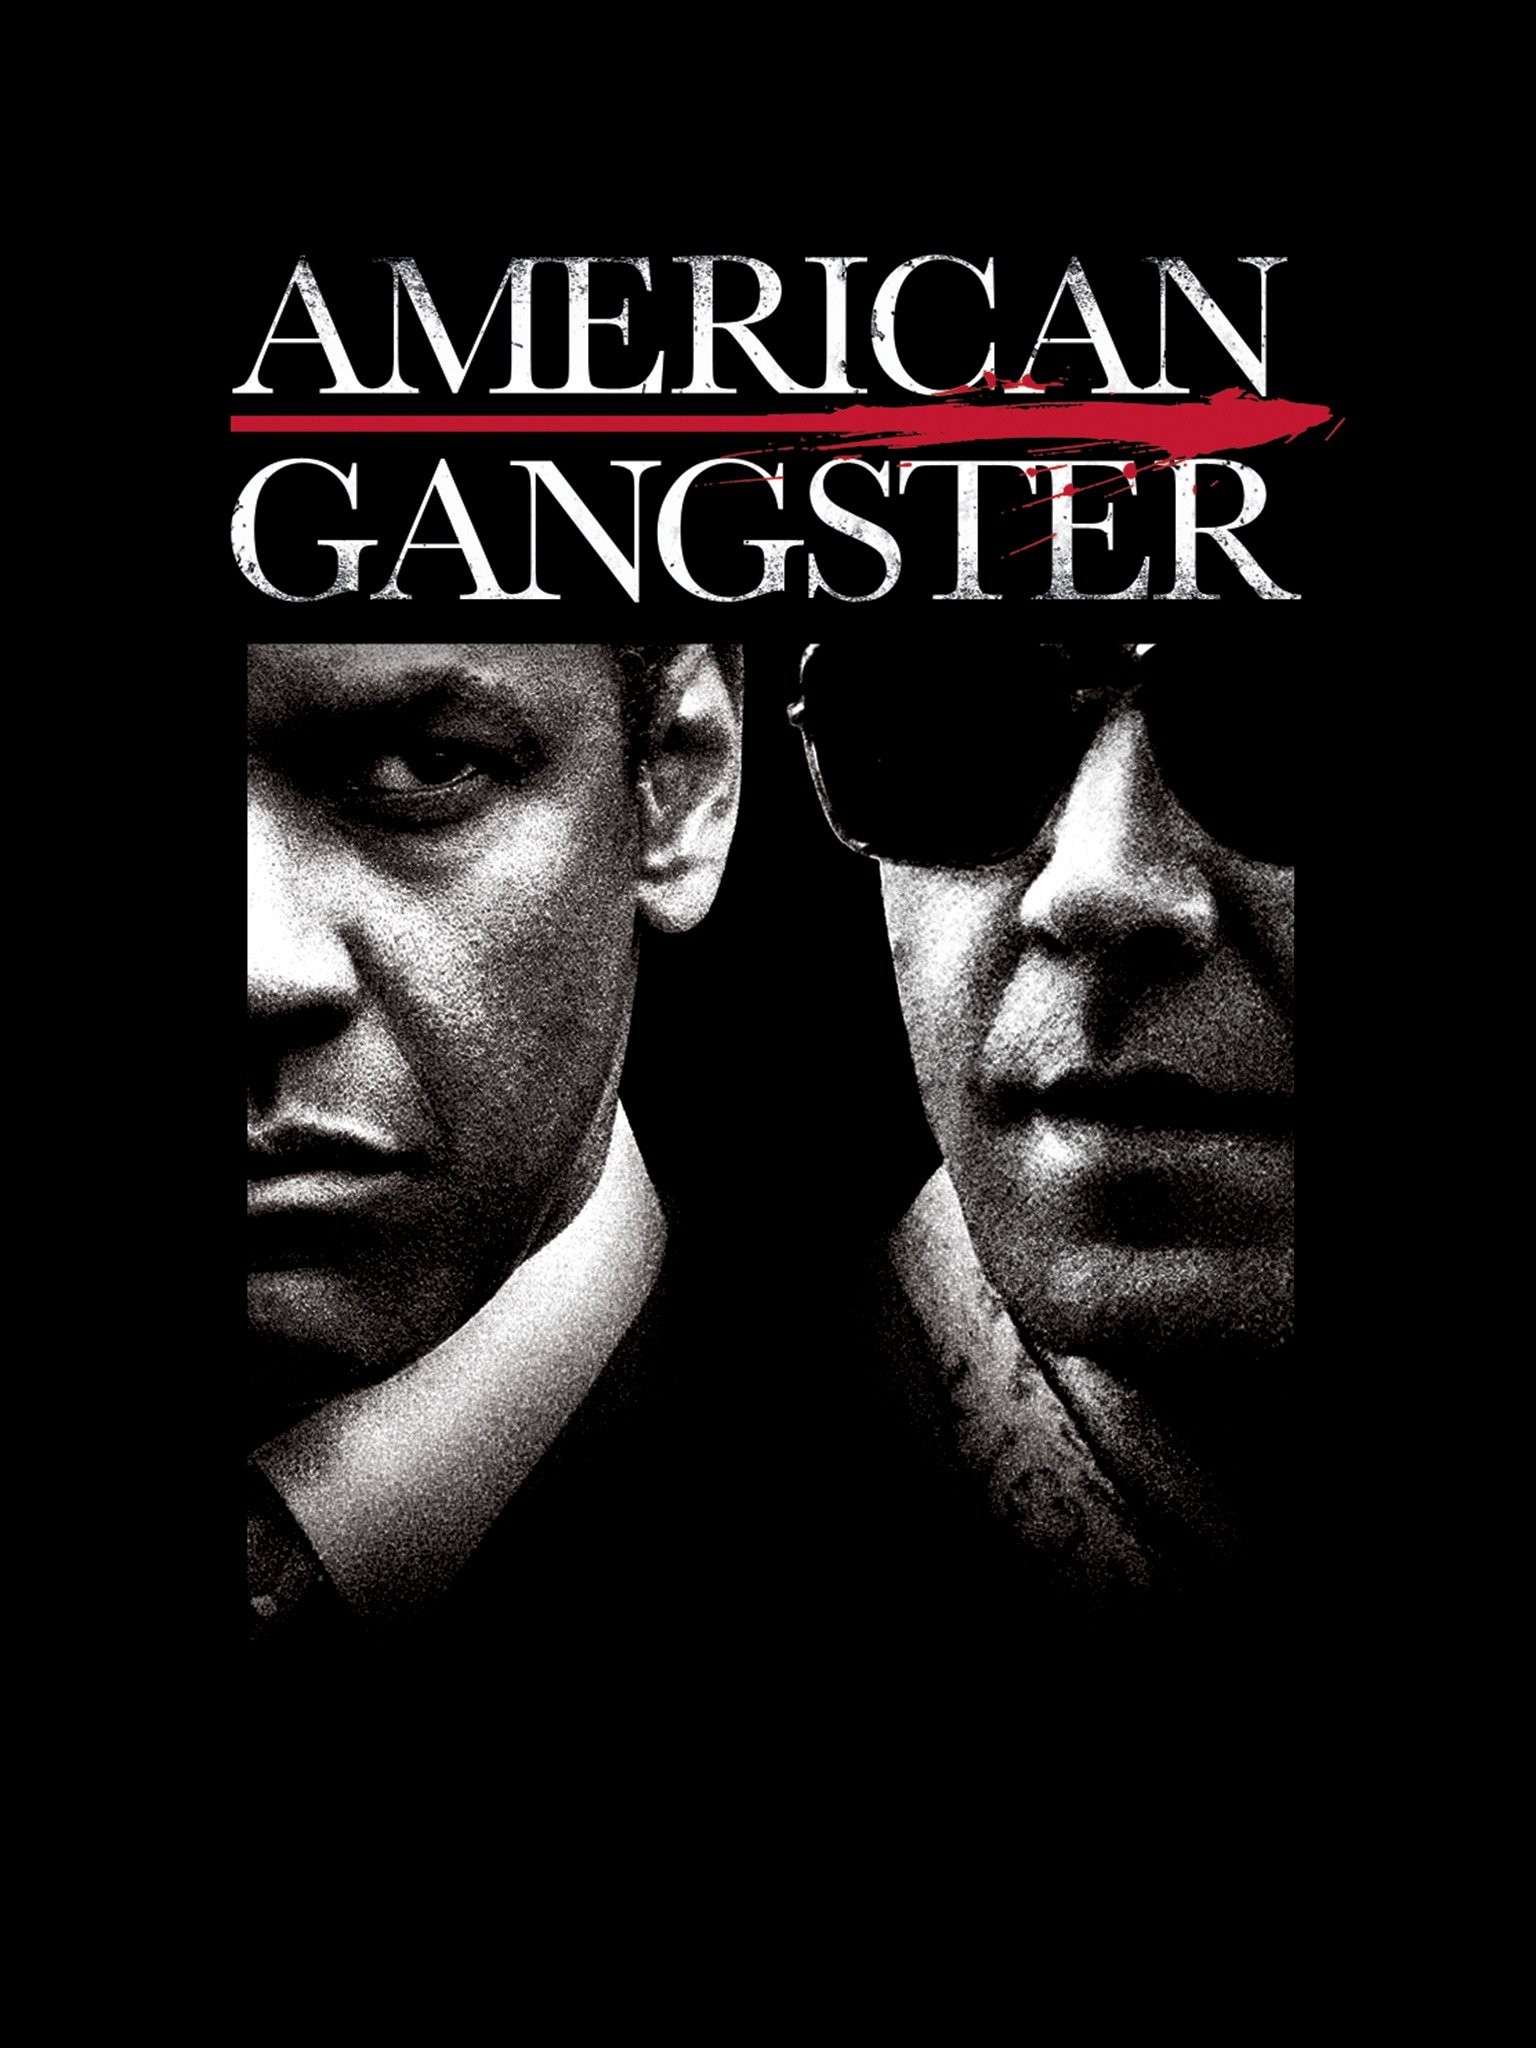 American Gangster Movie (2007) - Inspired By a True Story